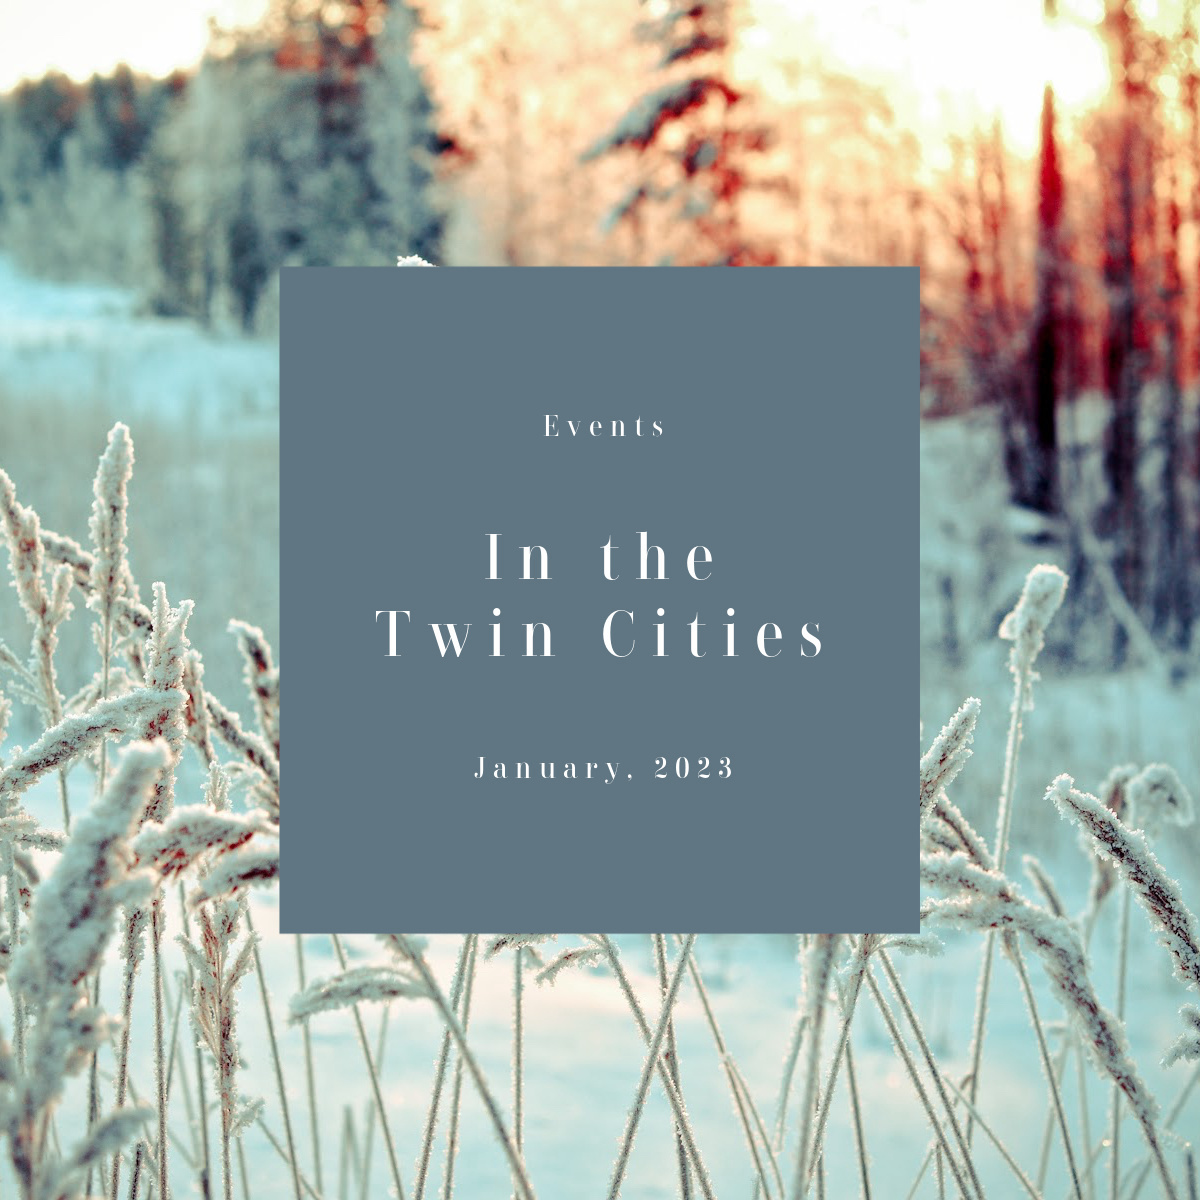 Events in the Twin Cities this January 2023